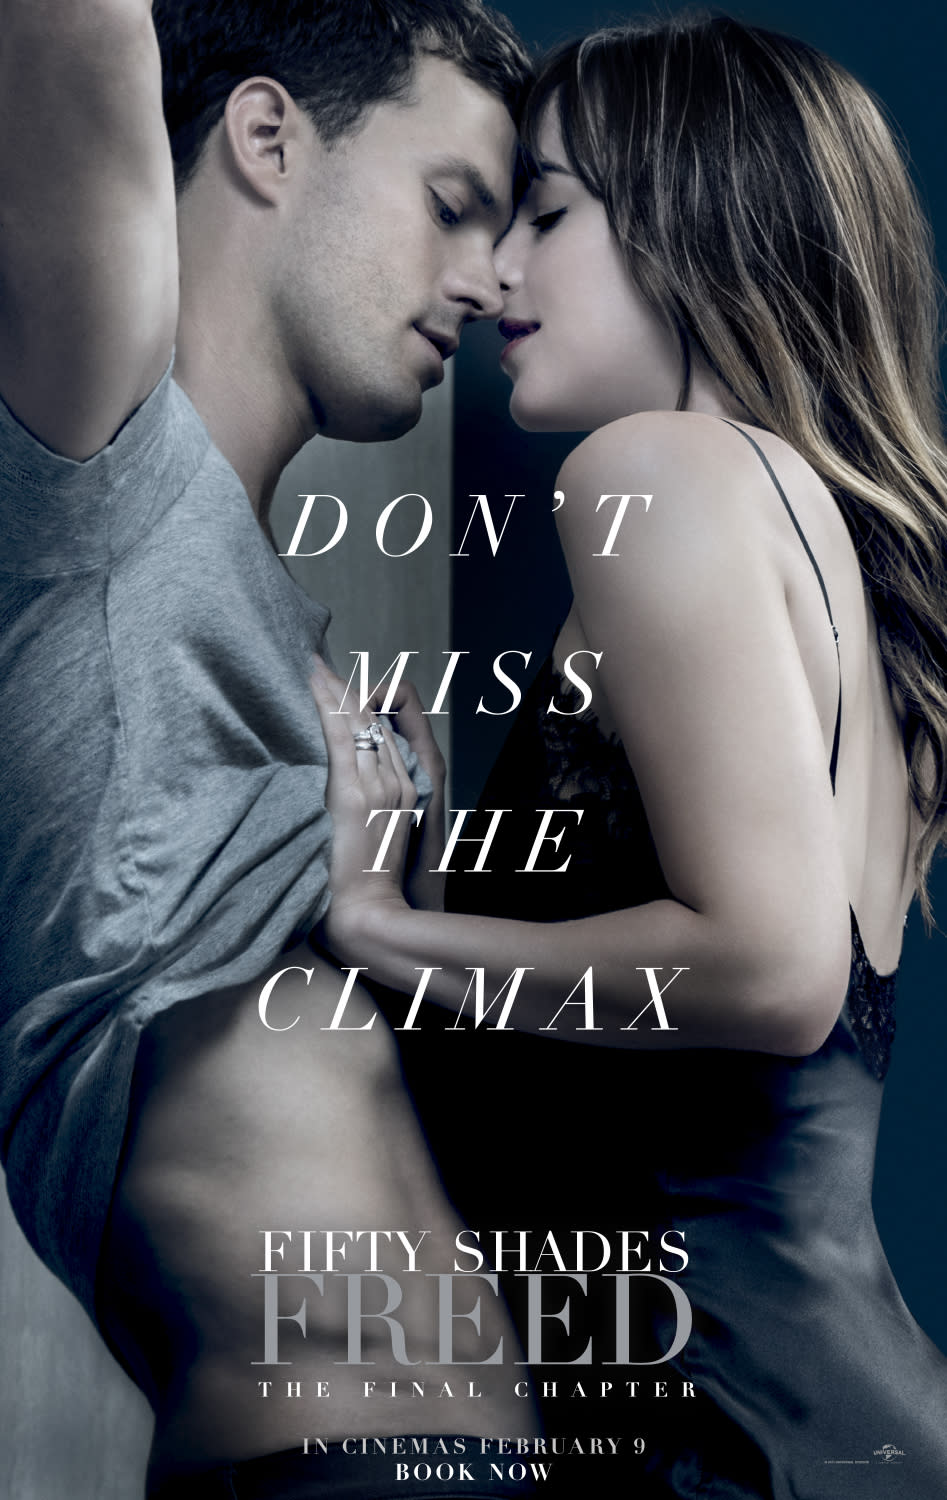 Don’t miss the subtle double entendre on the new ‘Fifty Shades Freed’ poster (Universal Pictures)